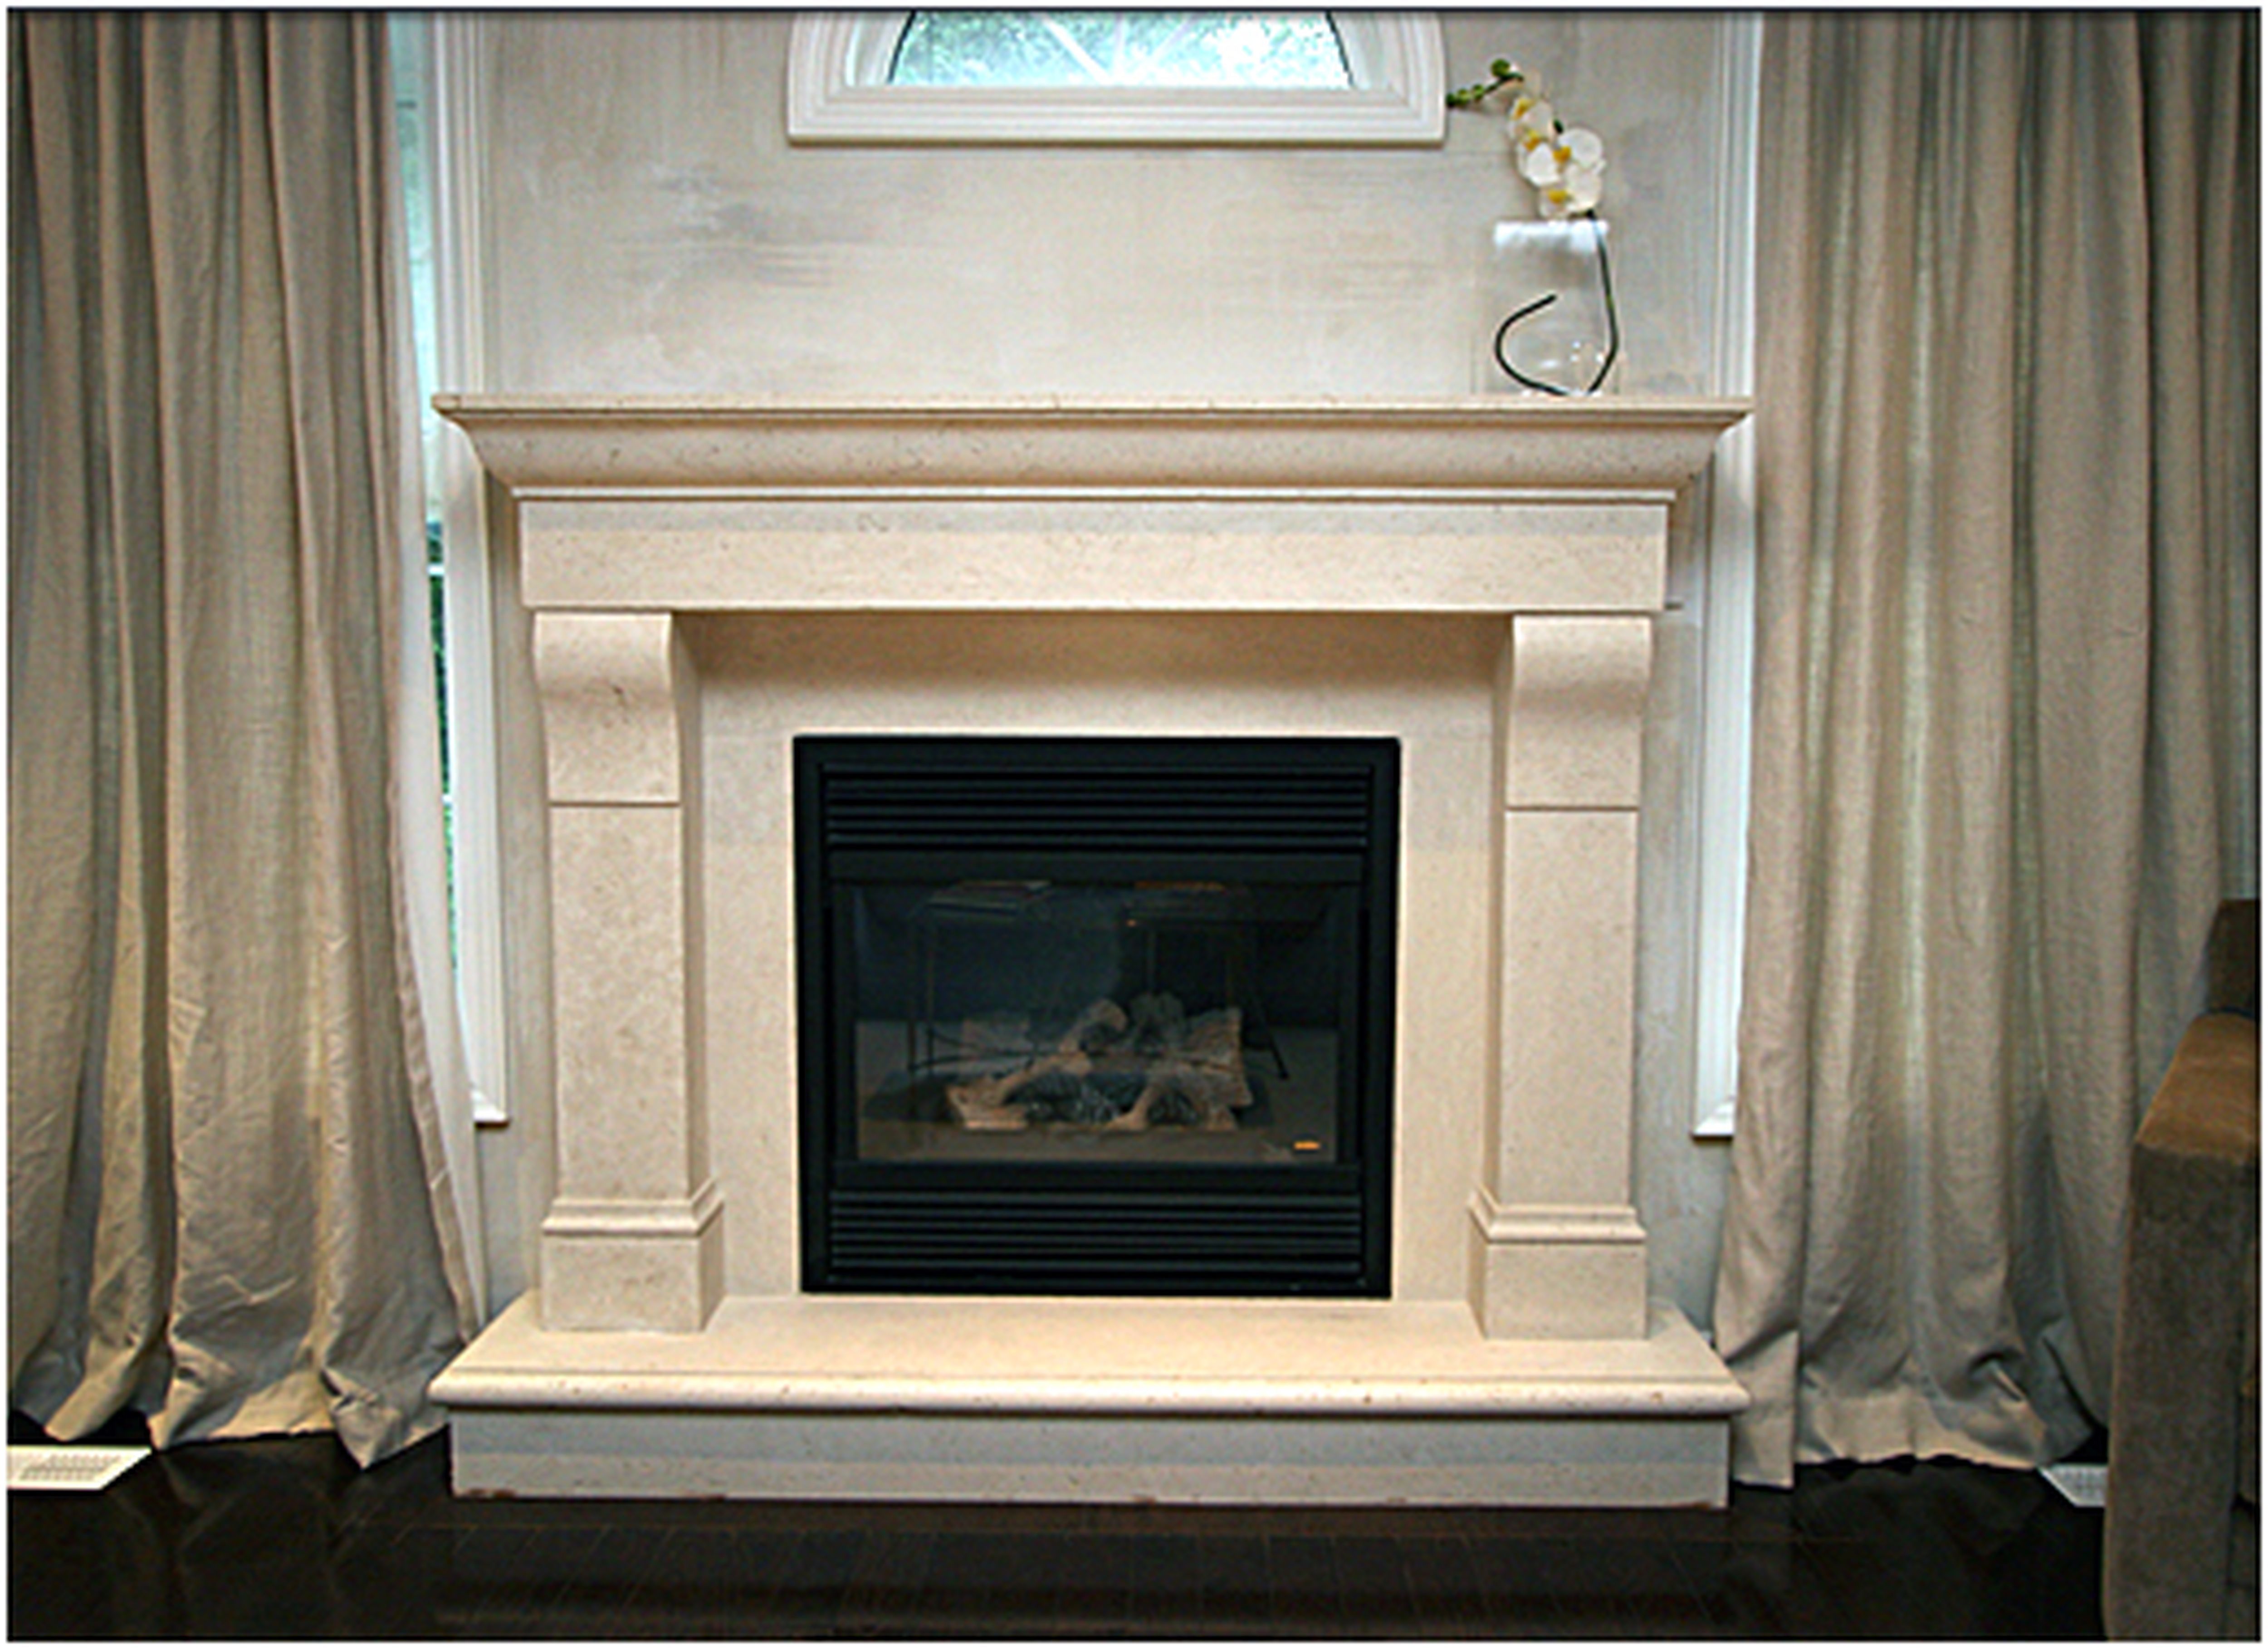 Stainless Steel Fireplace Surround Luxury Pin On Master Bedroom Fireplace